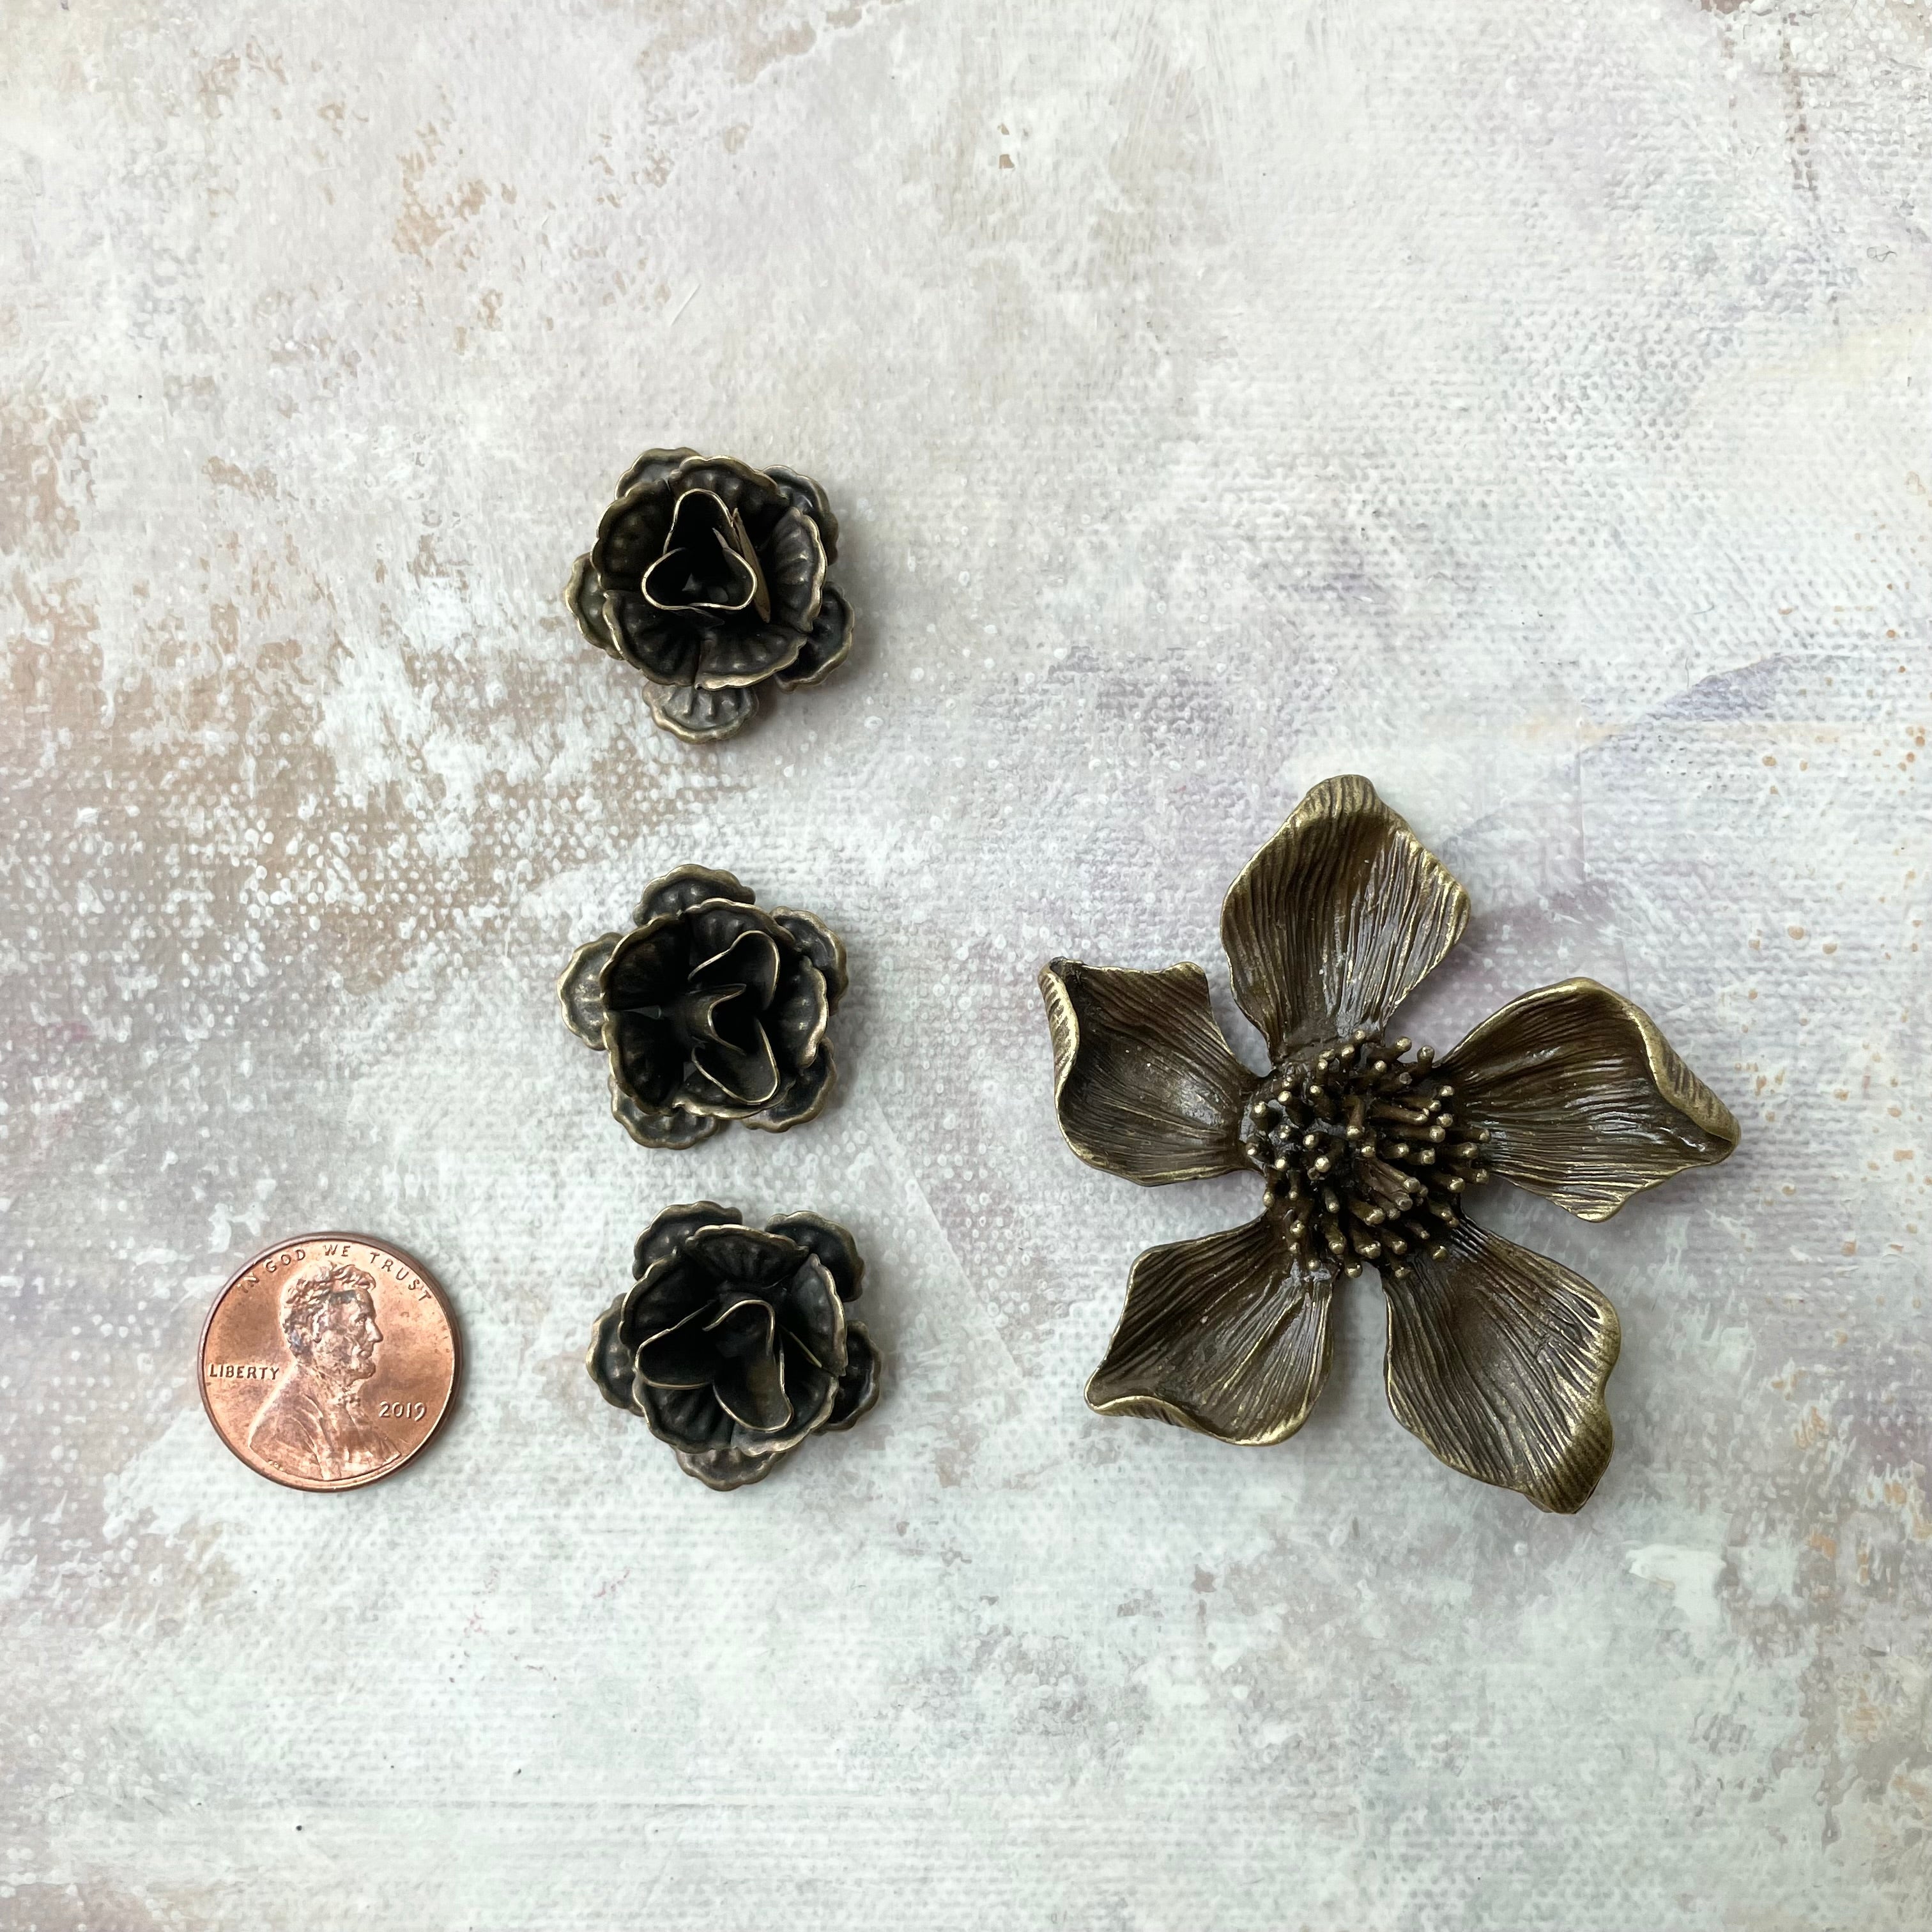 3 small metal styling flowers 1 larger metal styling flower with penny beside for size reference - flat lay props from Champagne & GRIT